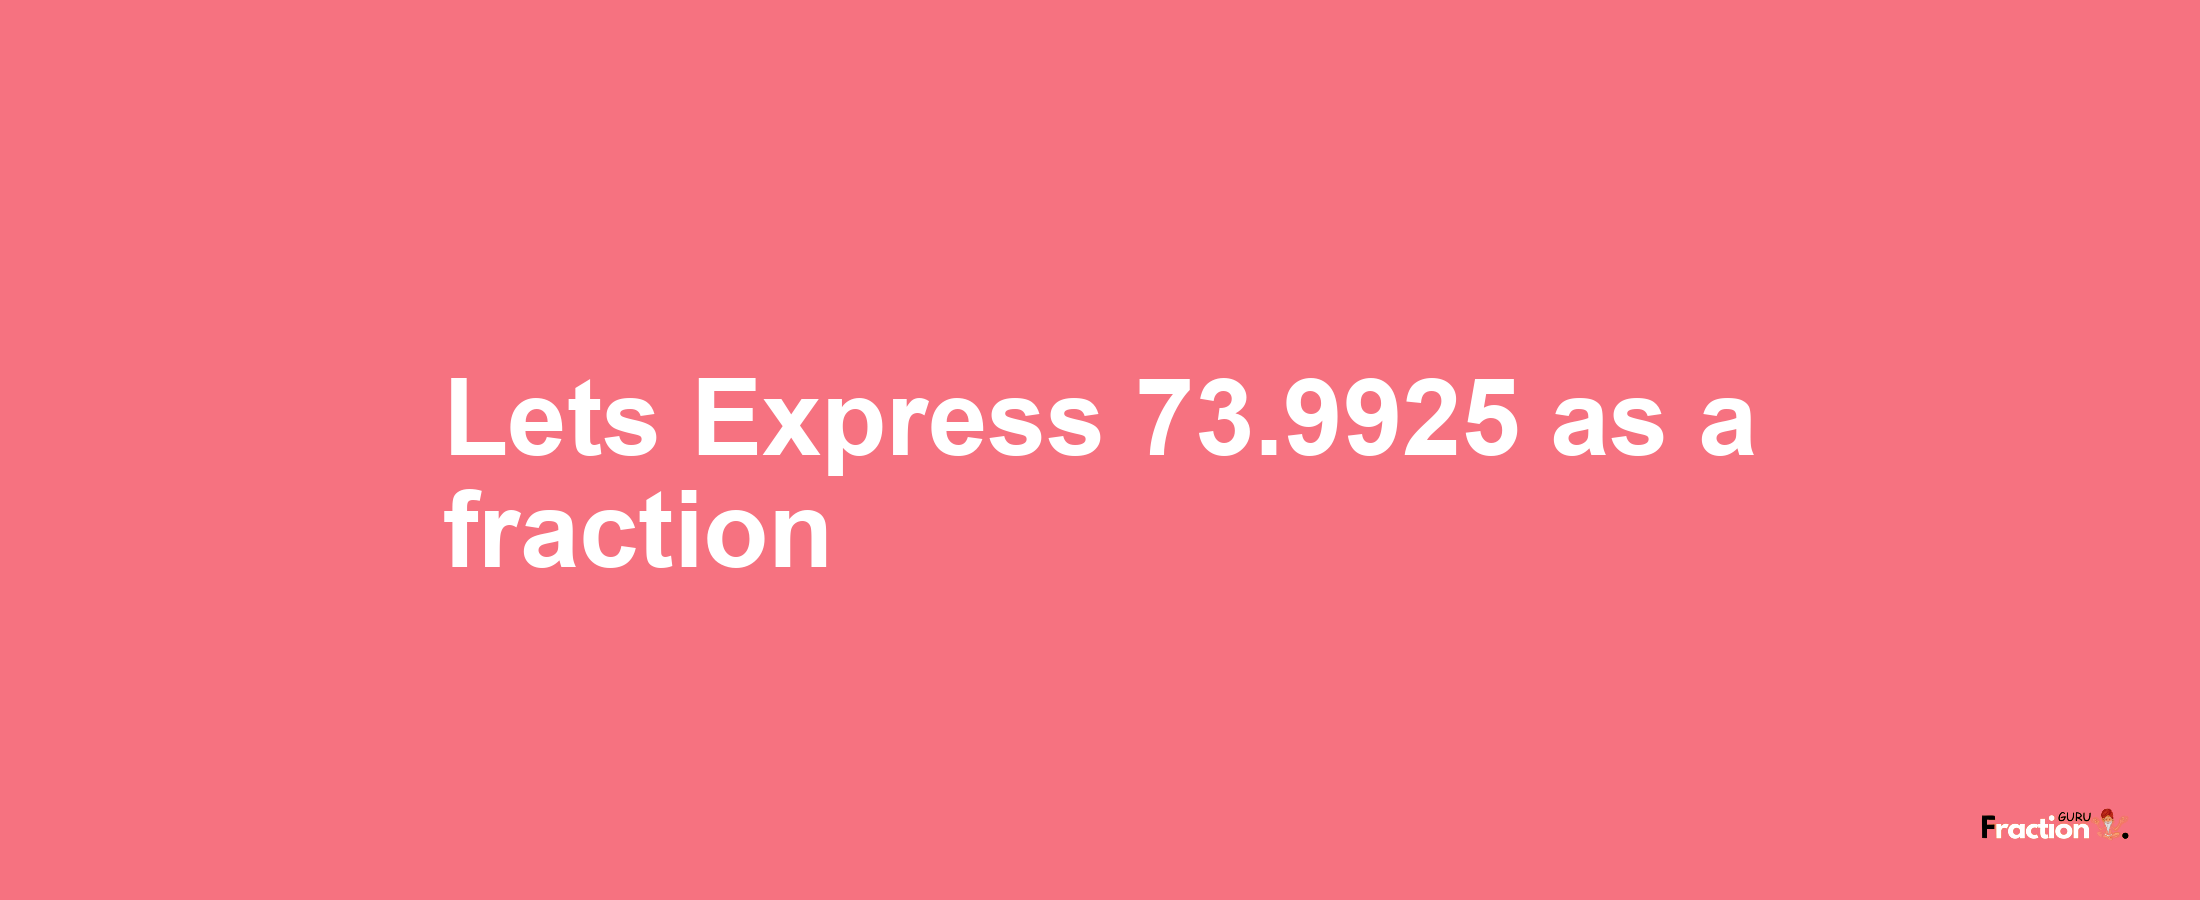 Lets Express 73.9925 as afraction